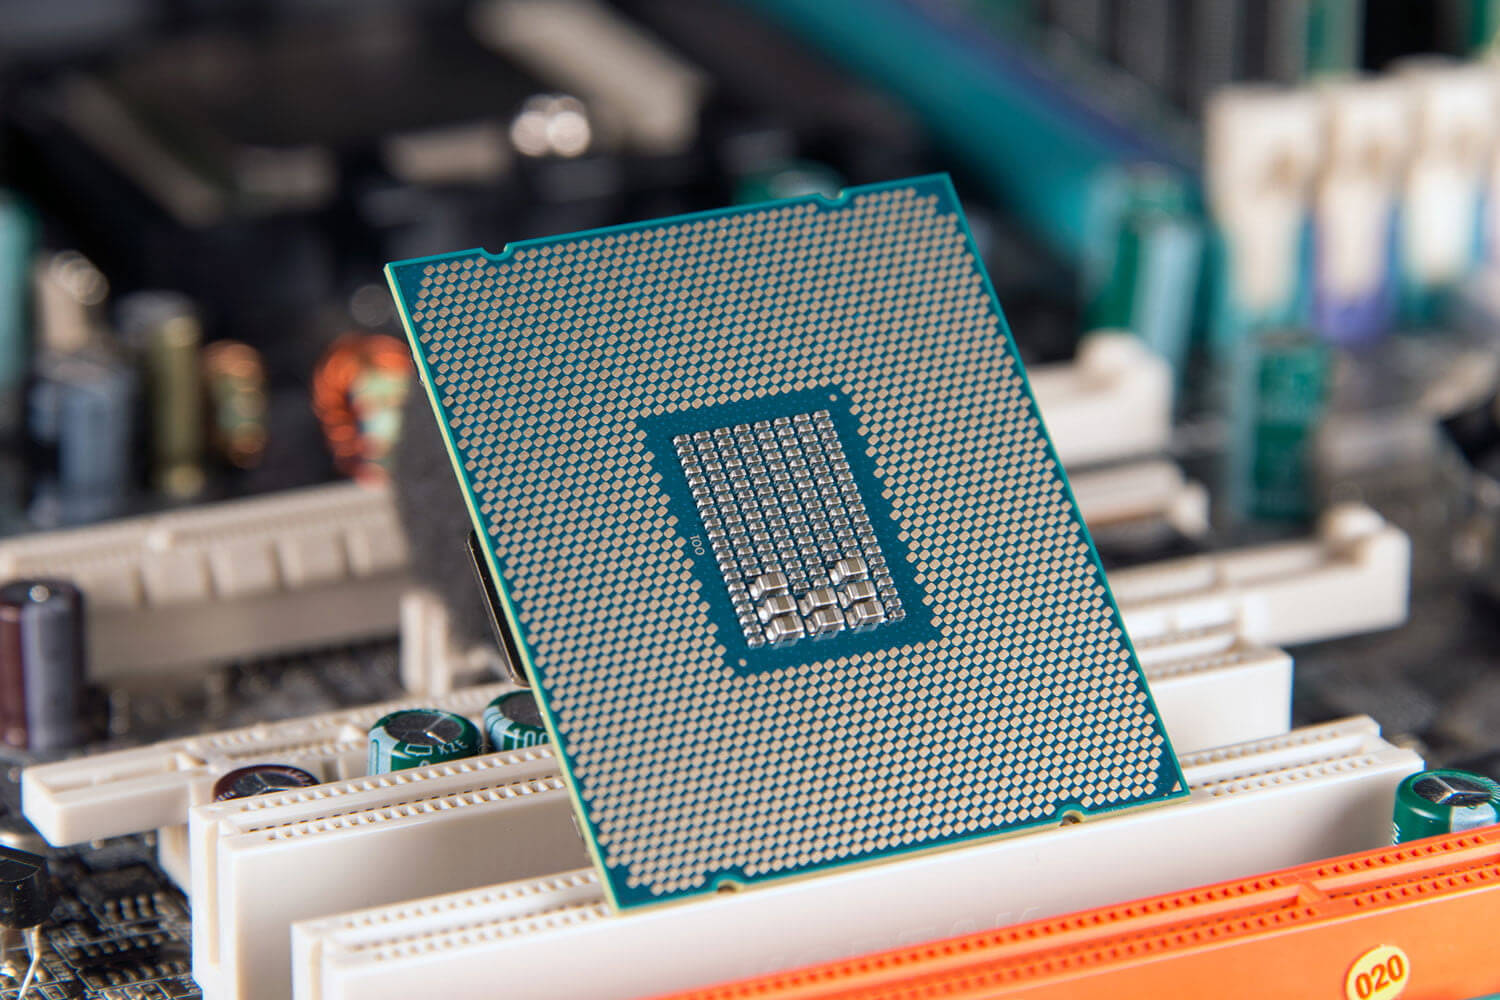 Intel to reveal 9th gen CPUs, Z390 chipset at event today